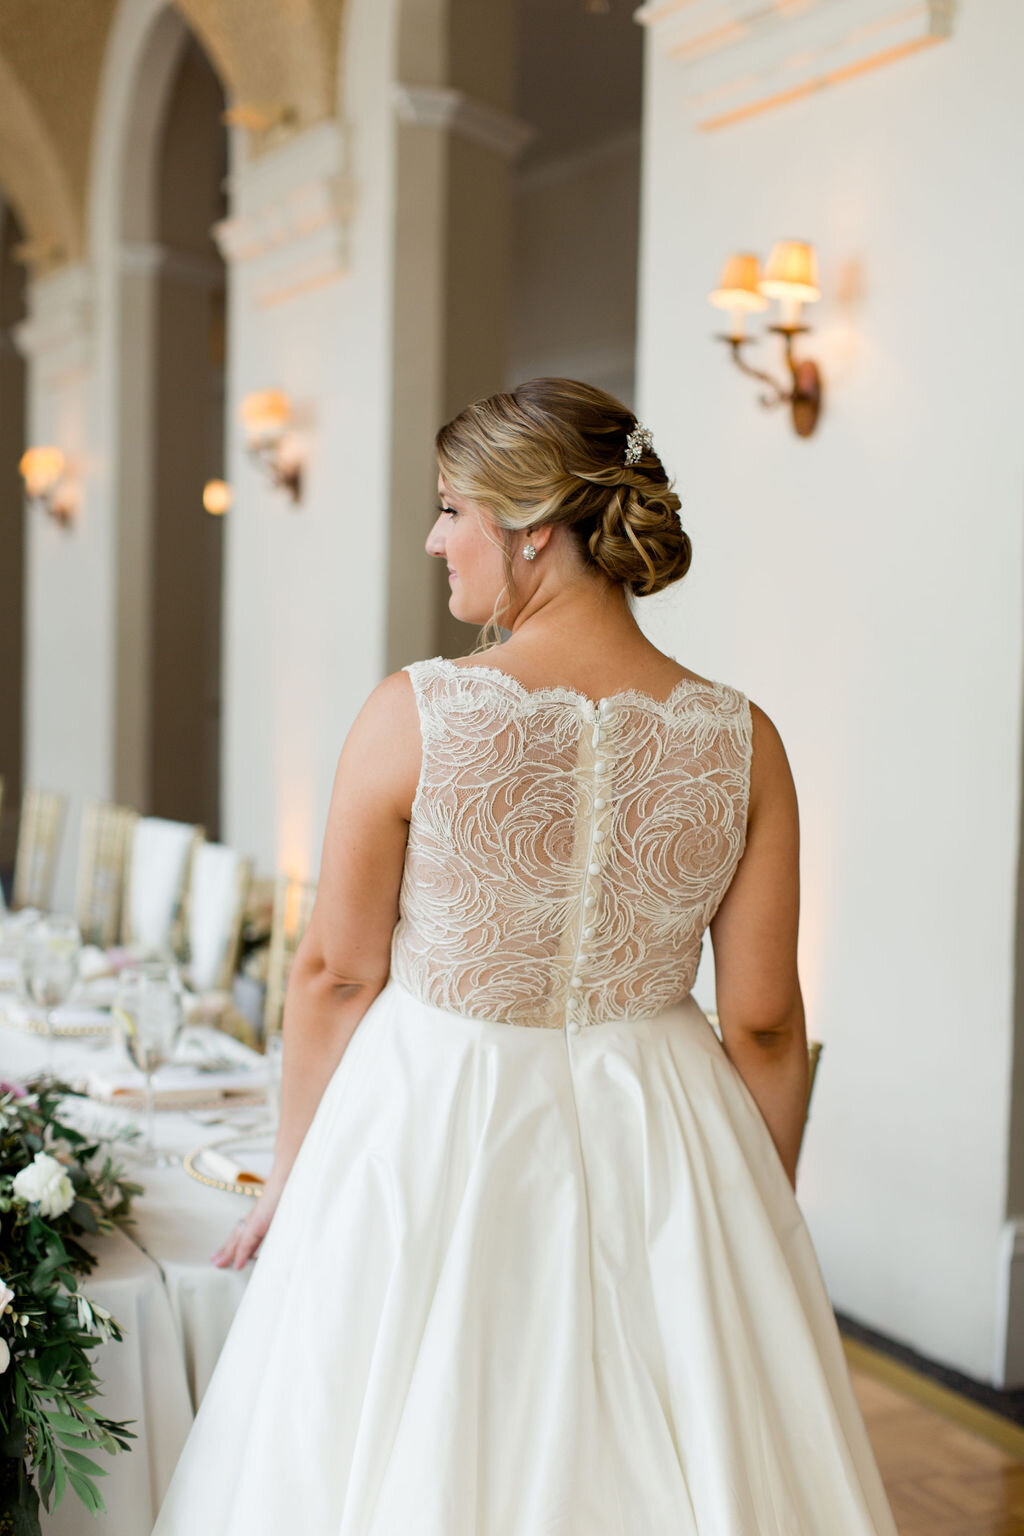 Floral lace back of wedding dress - Pearl weddings &amp; Events